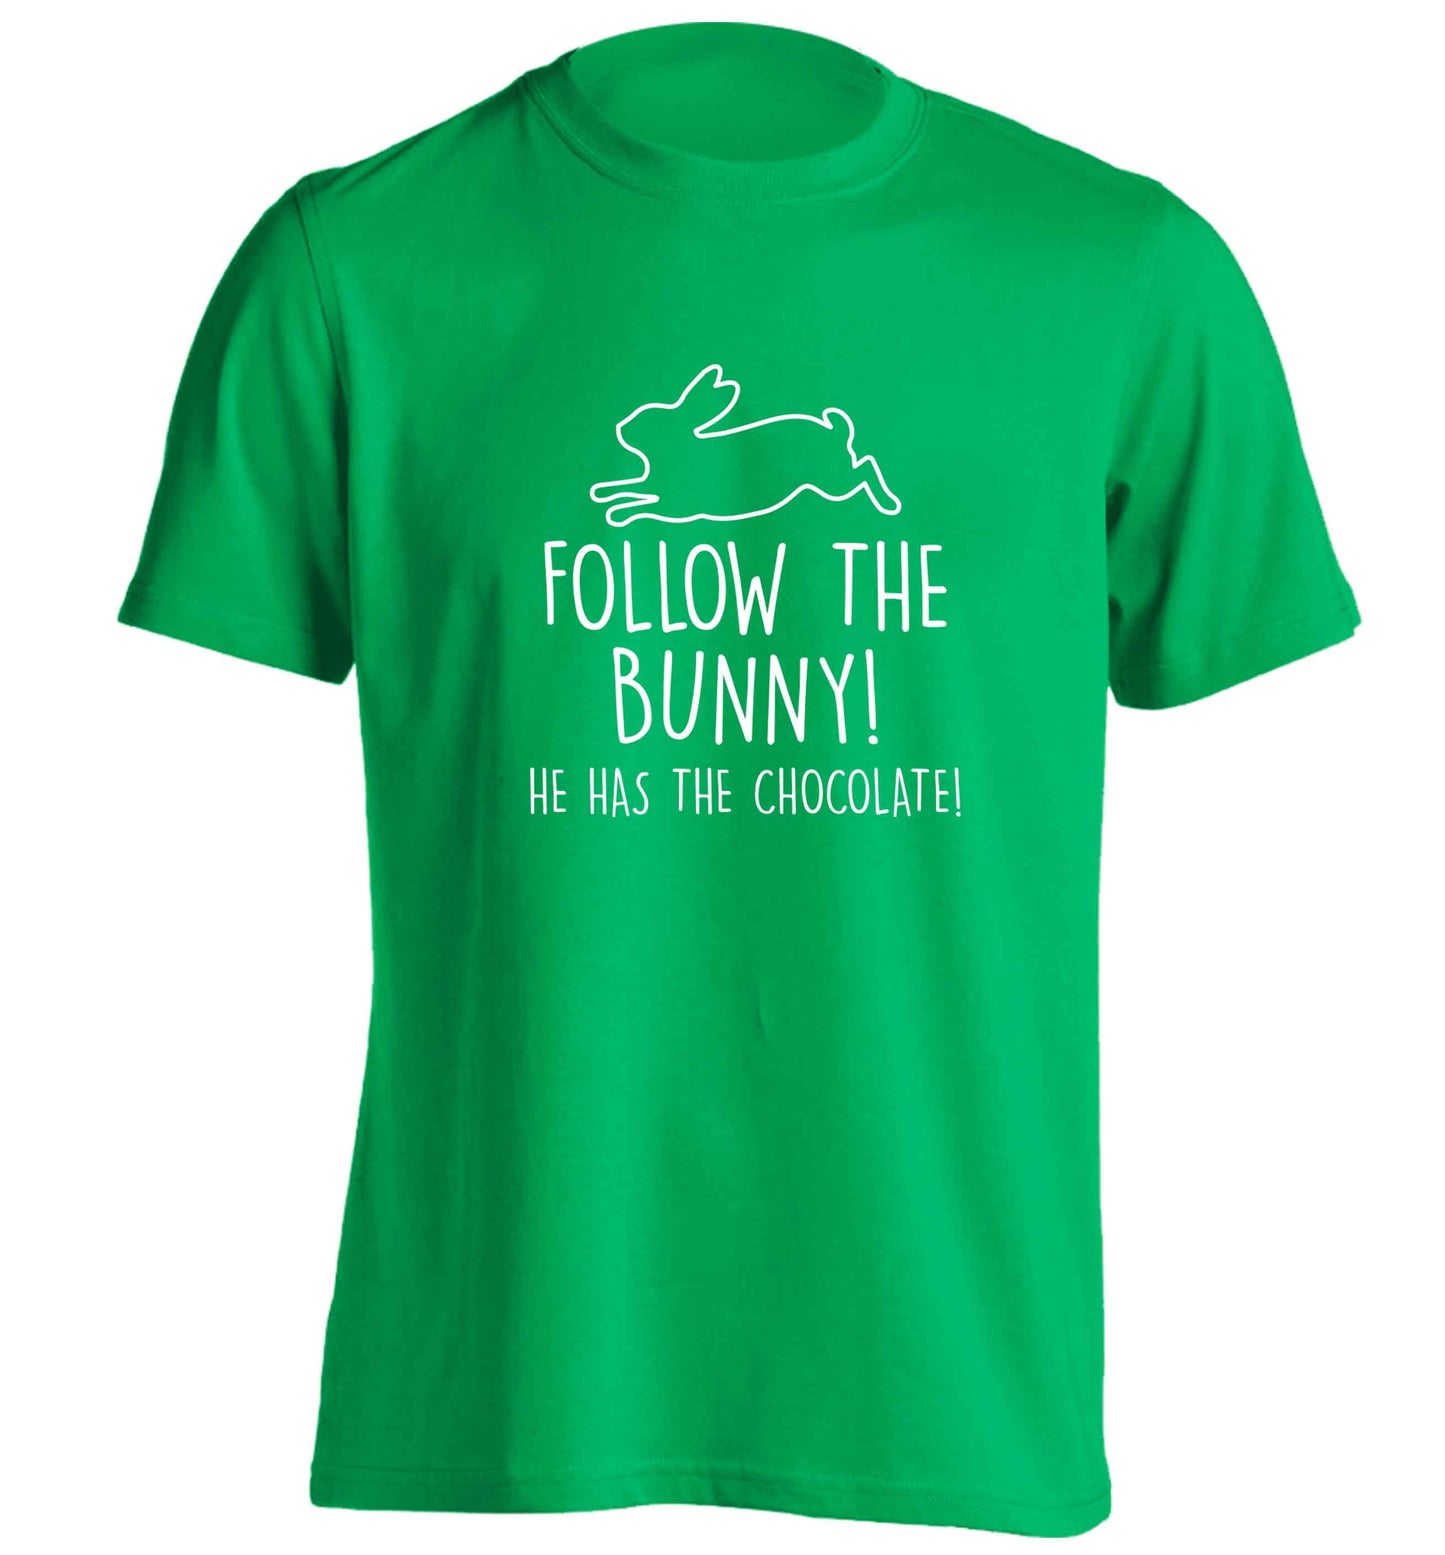 Follow the bunny! He has the chocolate adults unisex green Tshirt 2XL